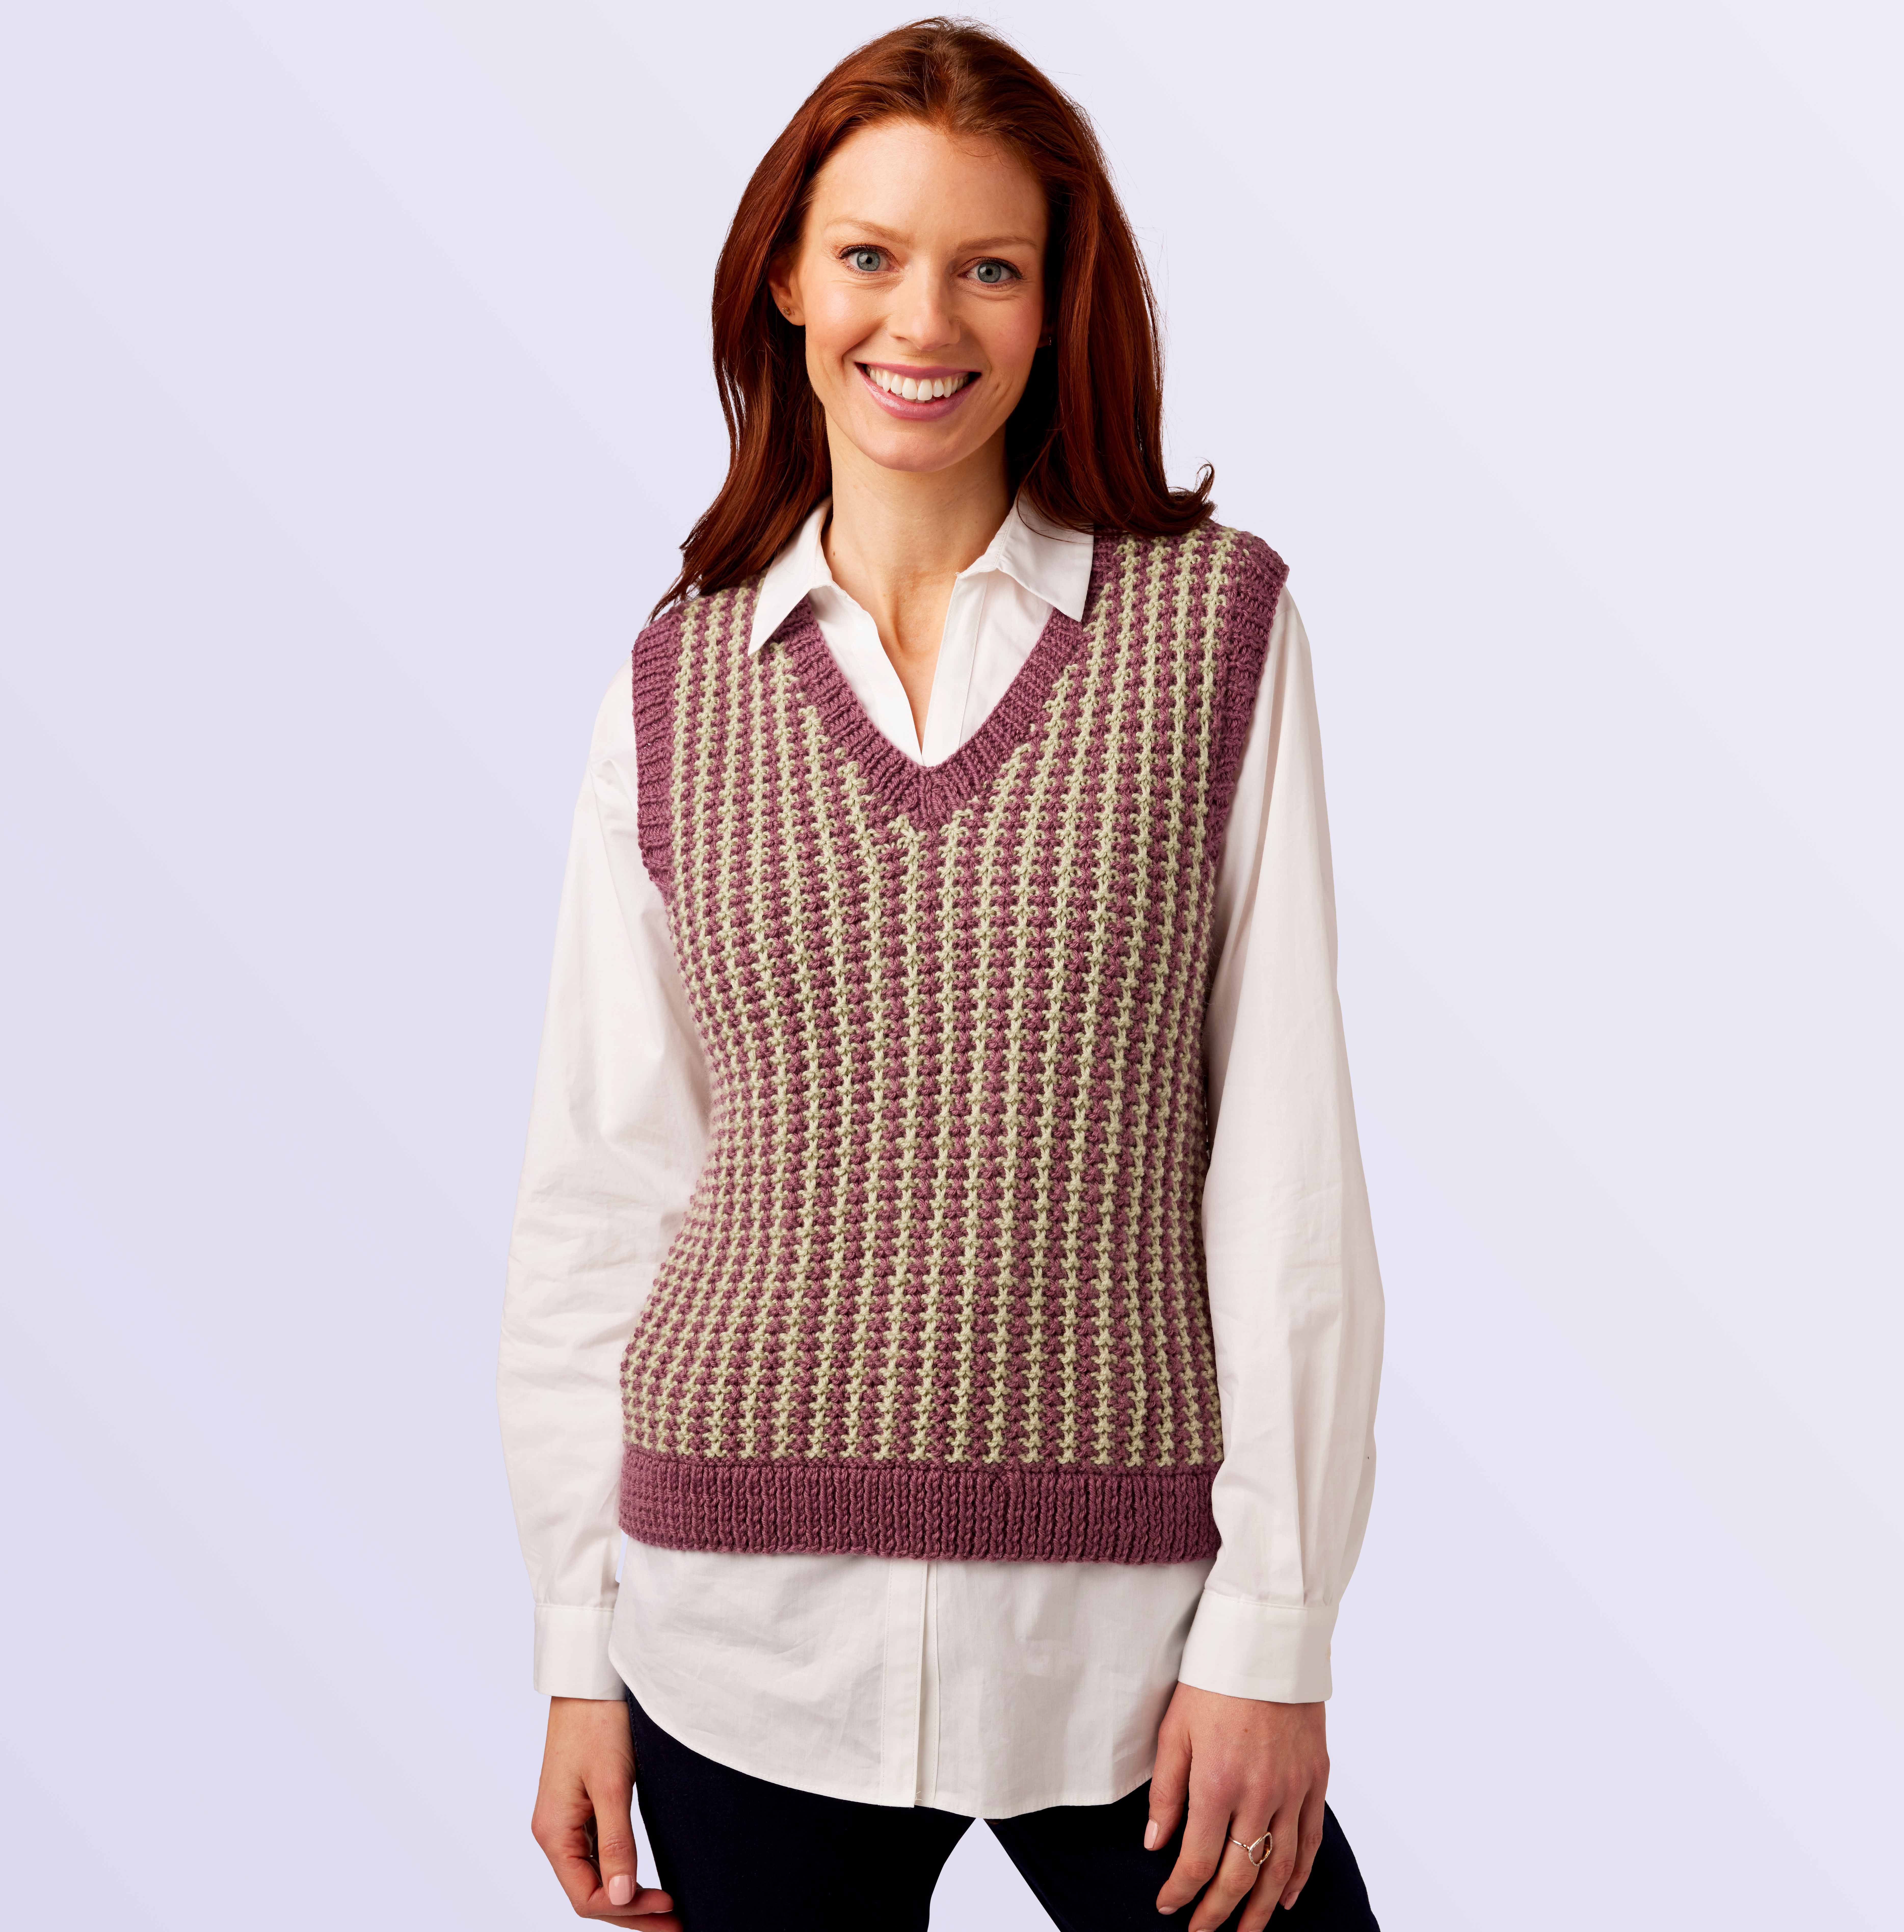 Free knitting pattern: How to knit a chic vest